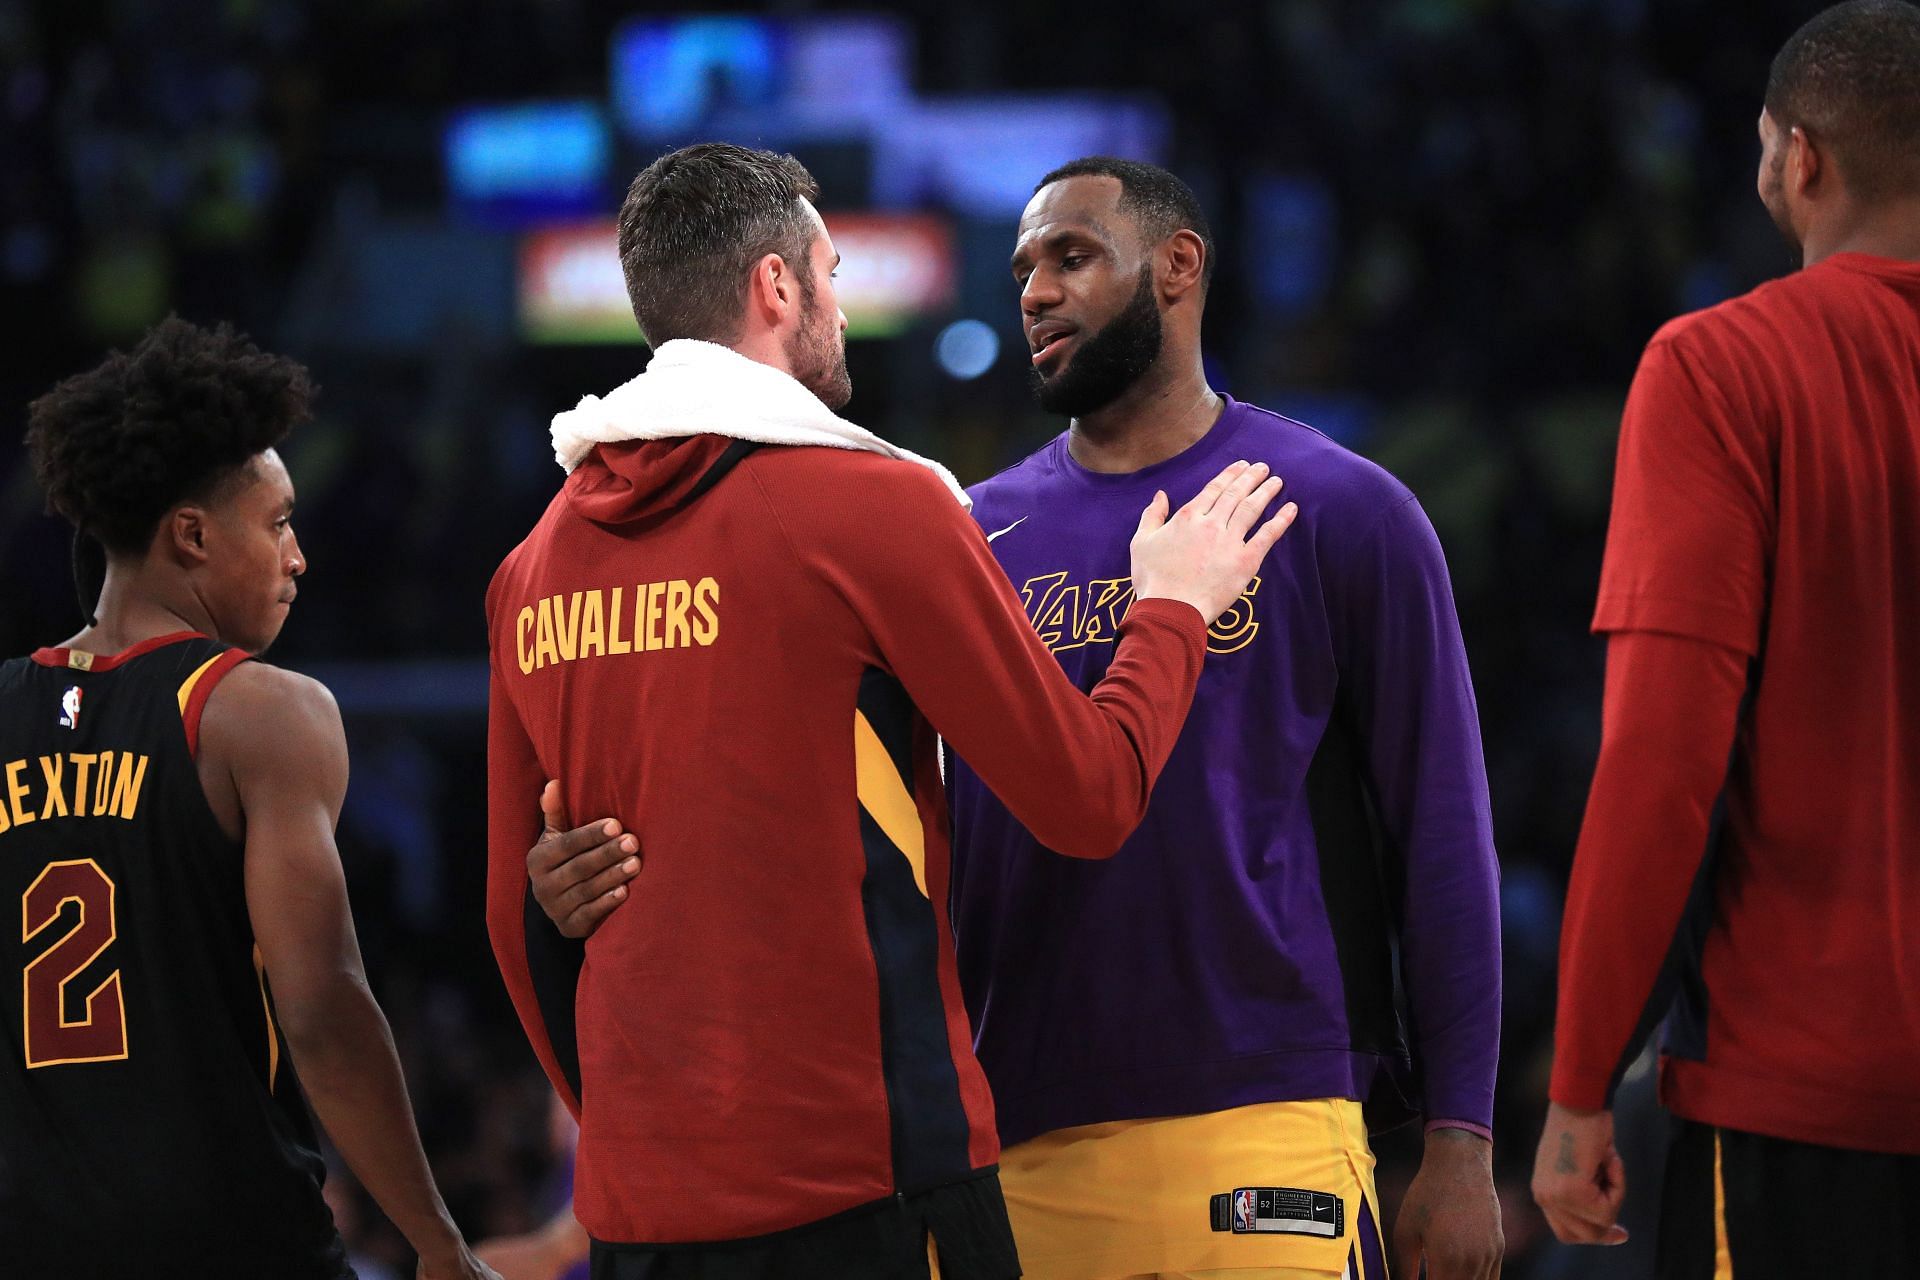 Former teammates Kevin Love and LeBron James embrace after the Lakers visit Cleveland.